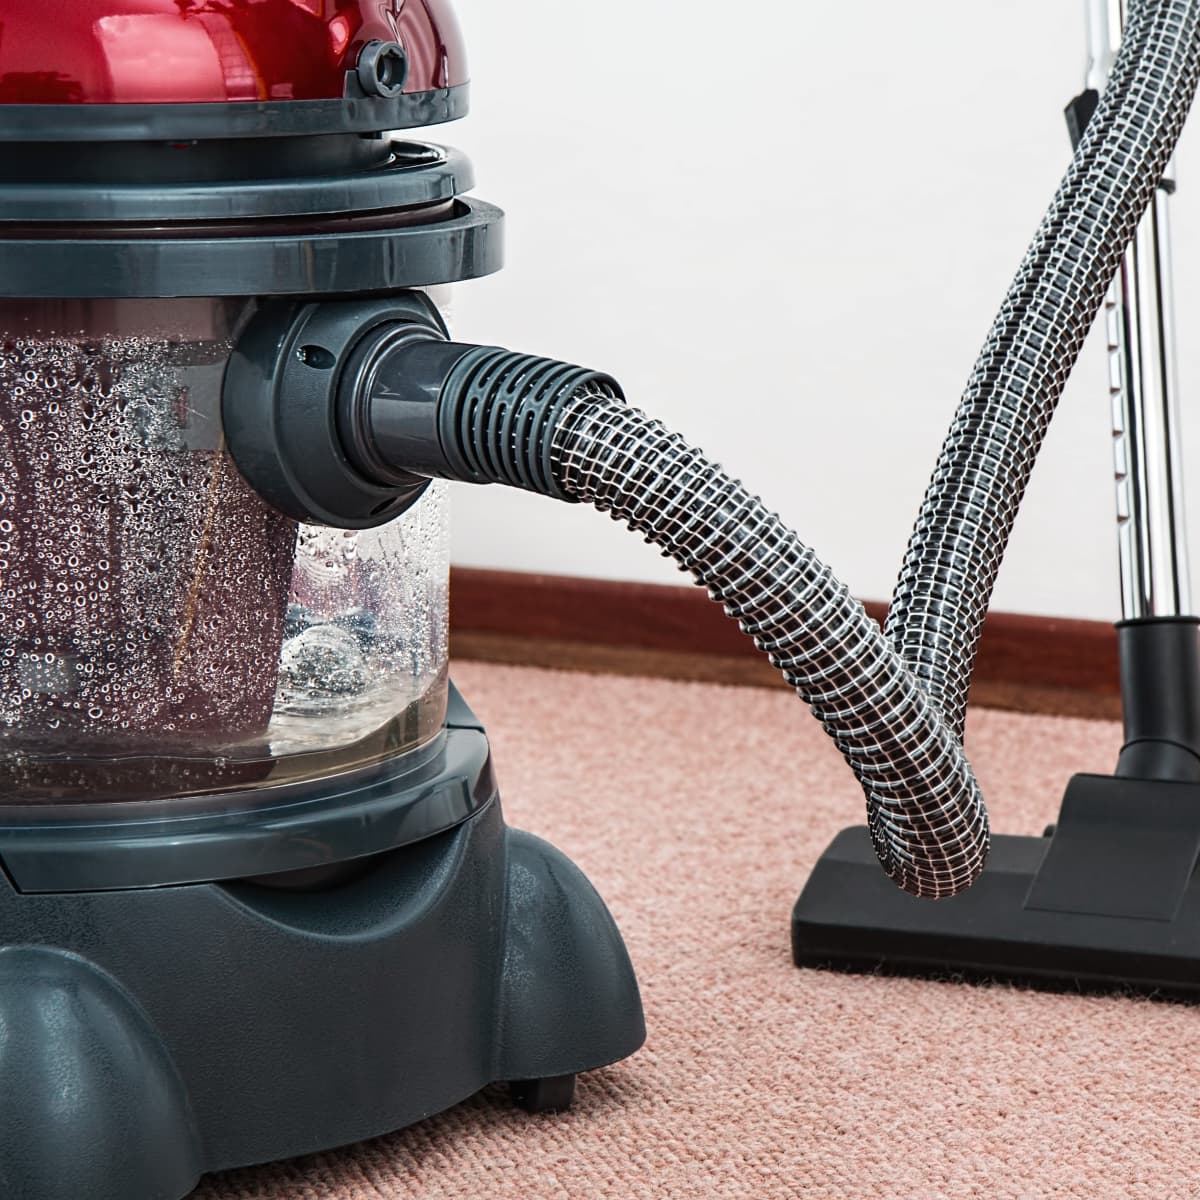 How To Use A Steam Cleaner: Step by Step